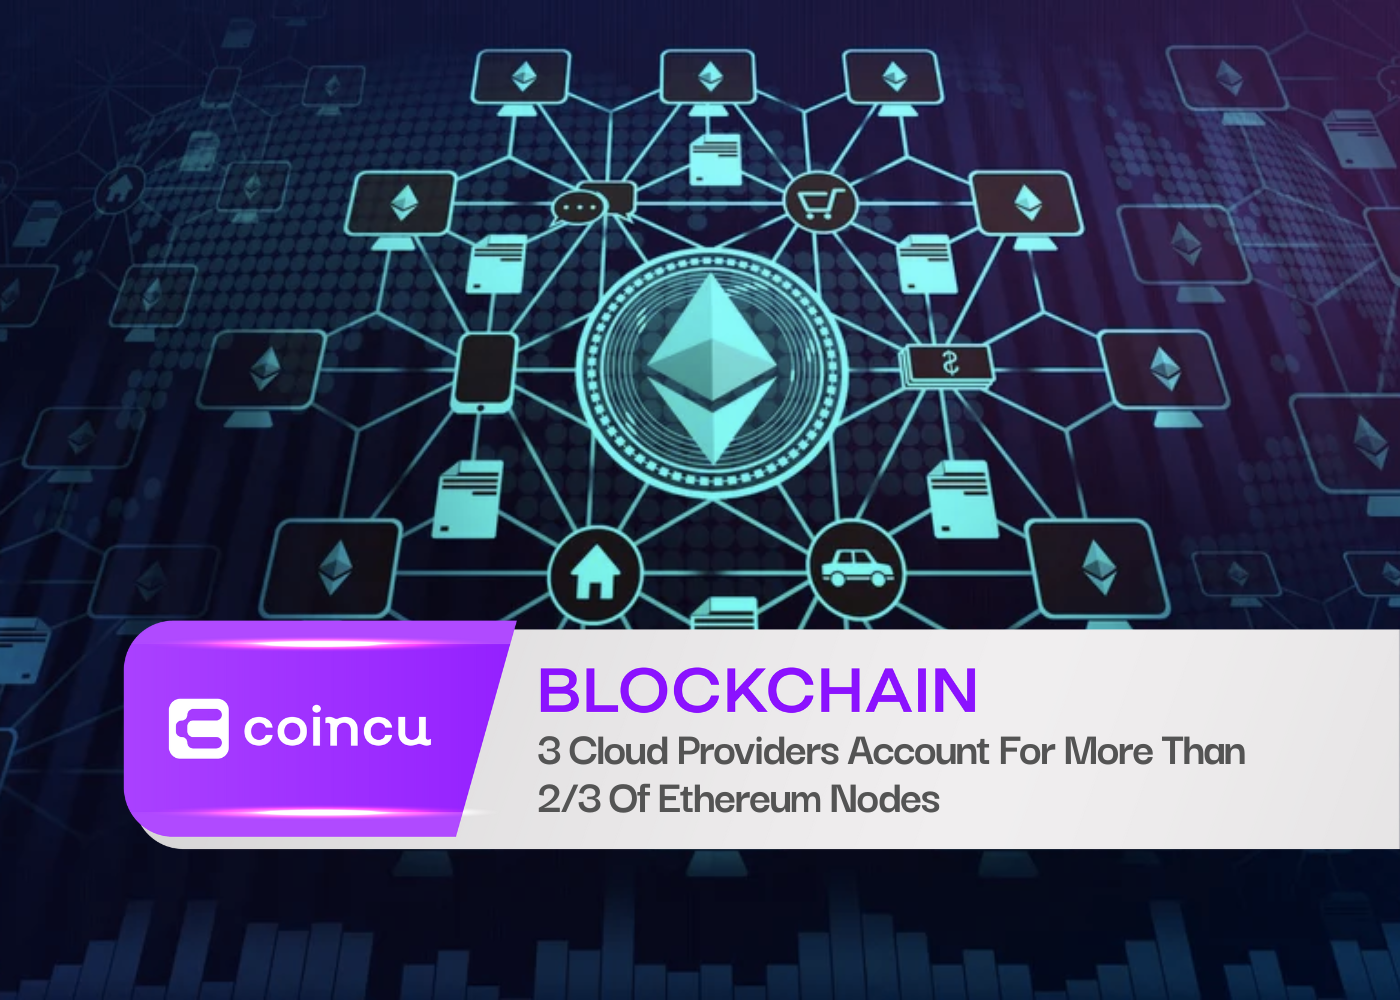 3 Cloud Providers Account For More Than 2/3 Of Ethereum Nodes